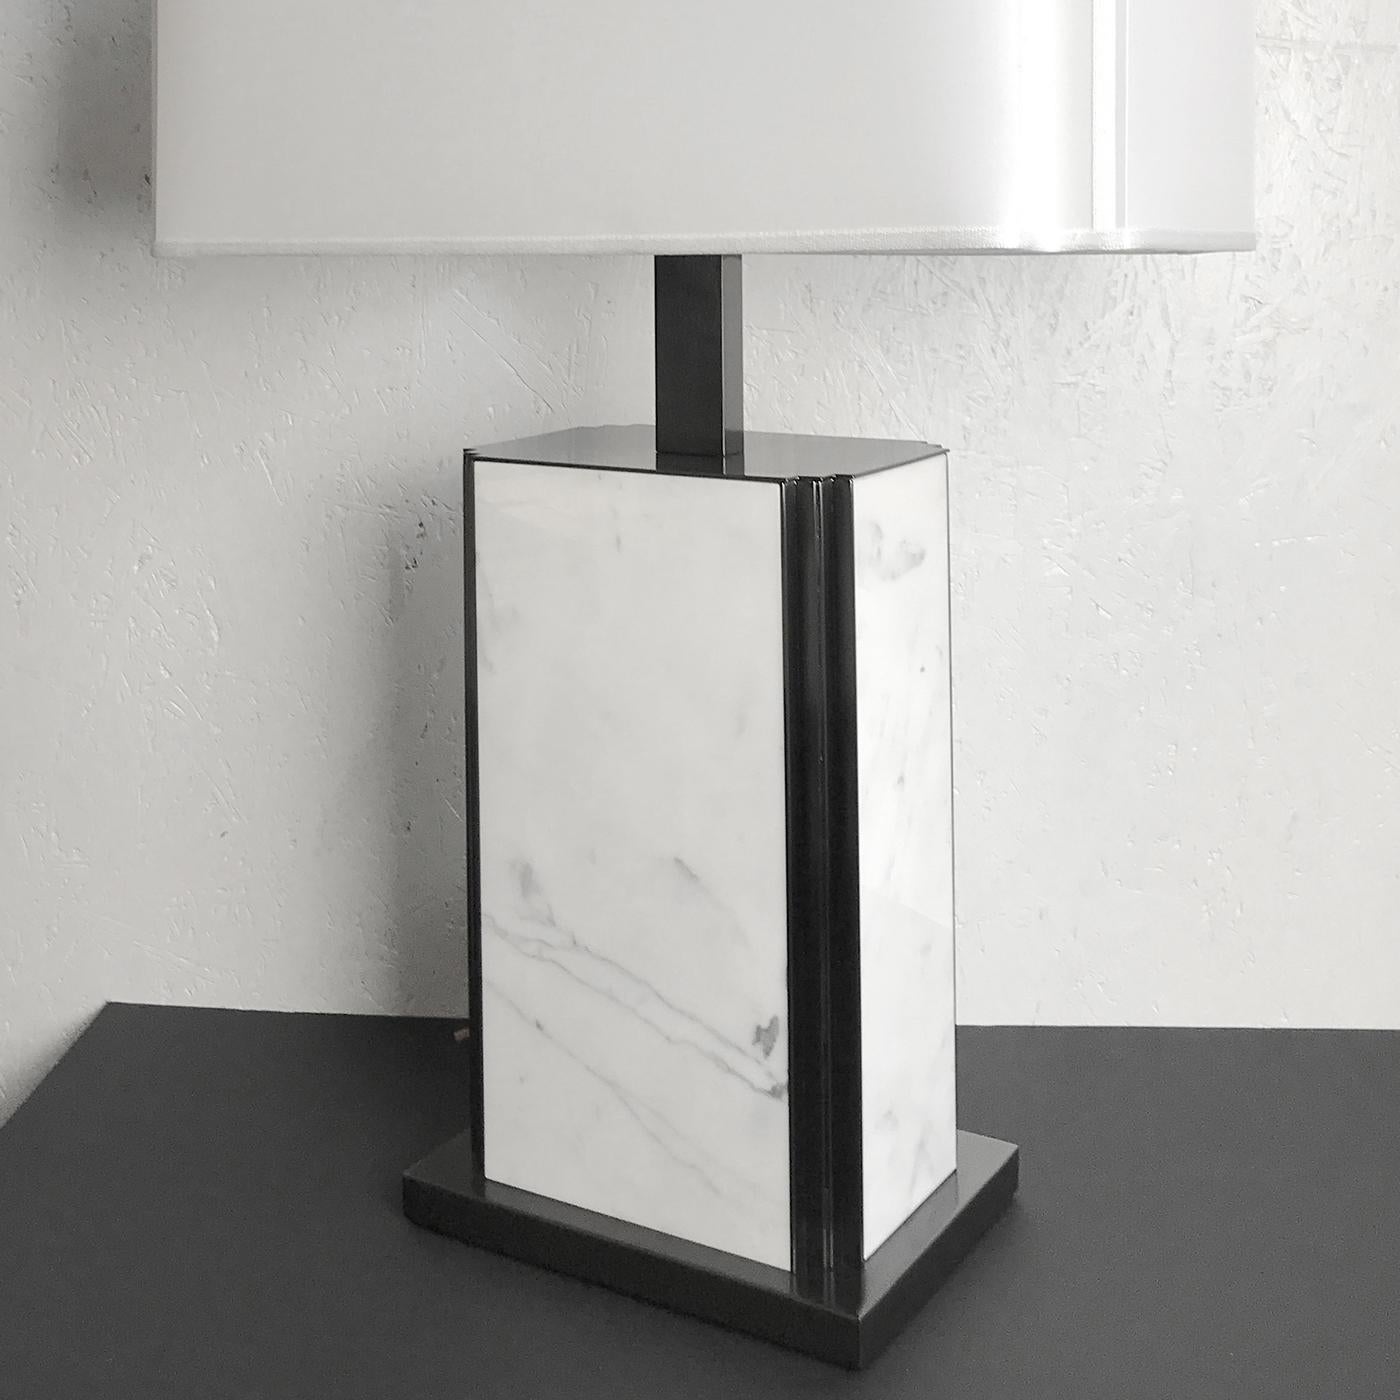 Perfect for the modern home where it will bring a sophisticated touch on any table or console, this table lamp exudes luxury with its sleek Carrara marble base and crisp fabric shade. Graphic and bold, this statement-making table lamp's angular